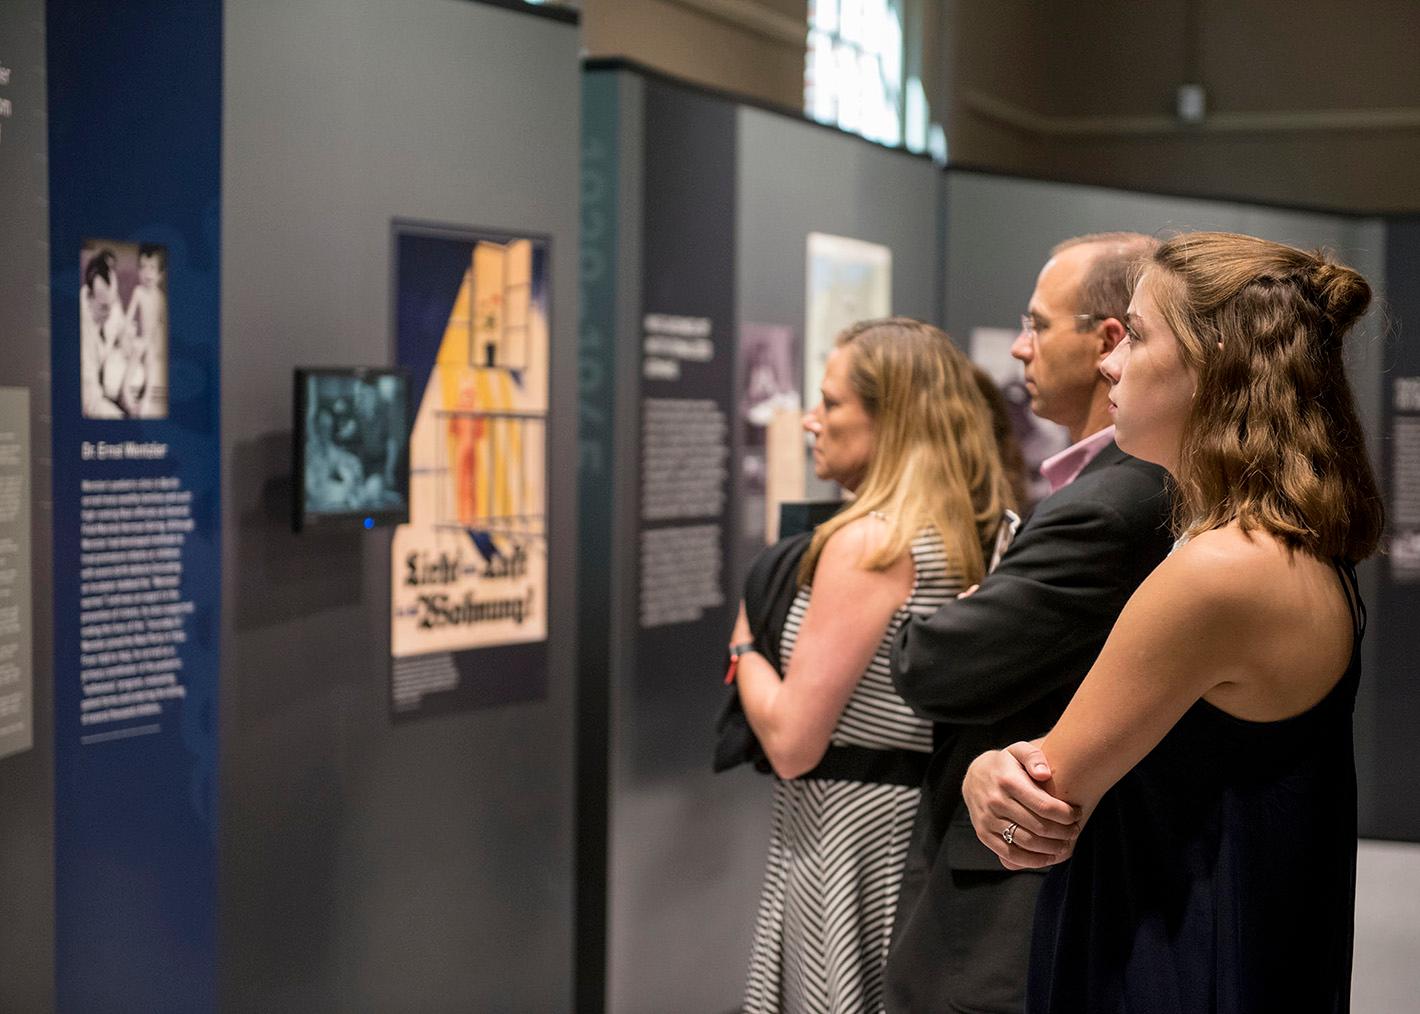 Visitors viewing Deadly Medicine: Creating the Master Race. The exhibition was produced by the USHMM and traveled to the Reece Museum the fall of 2017.